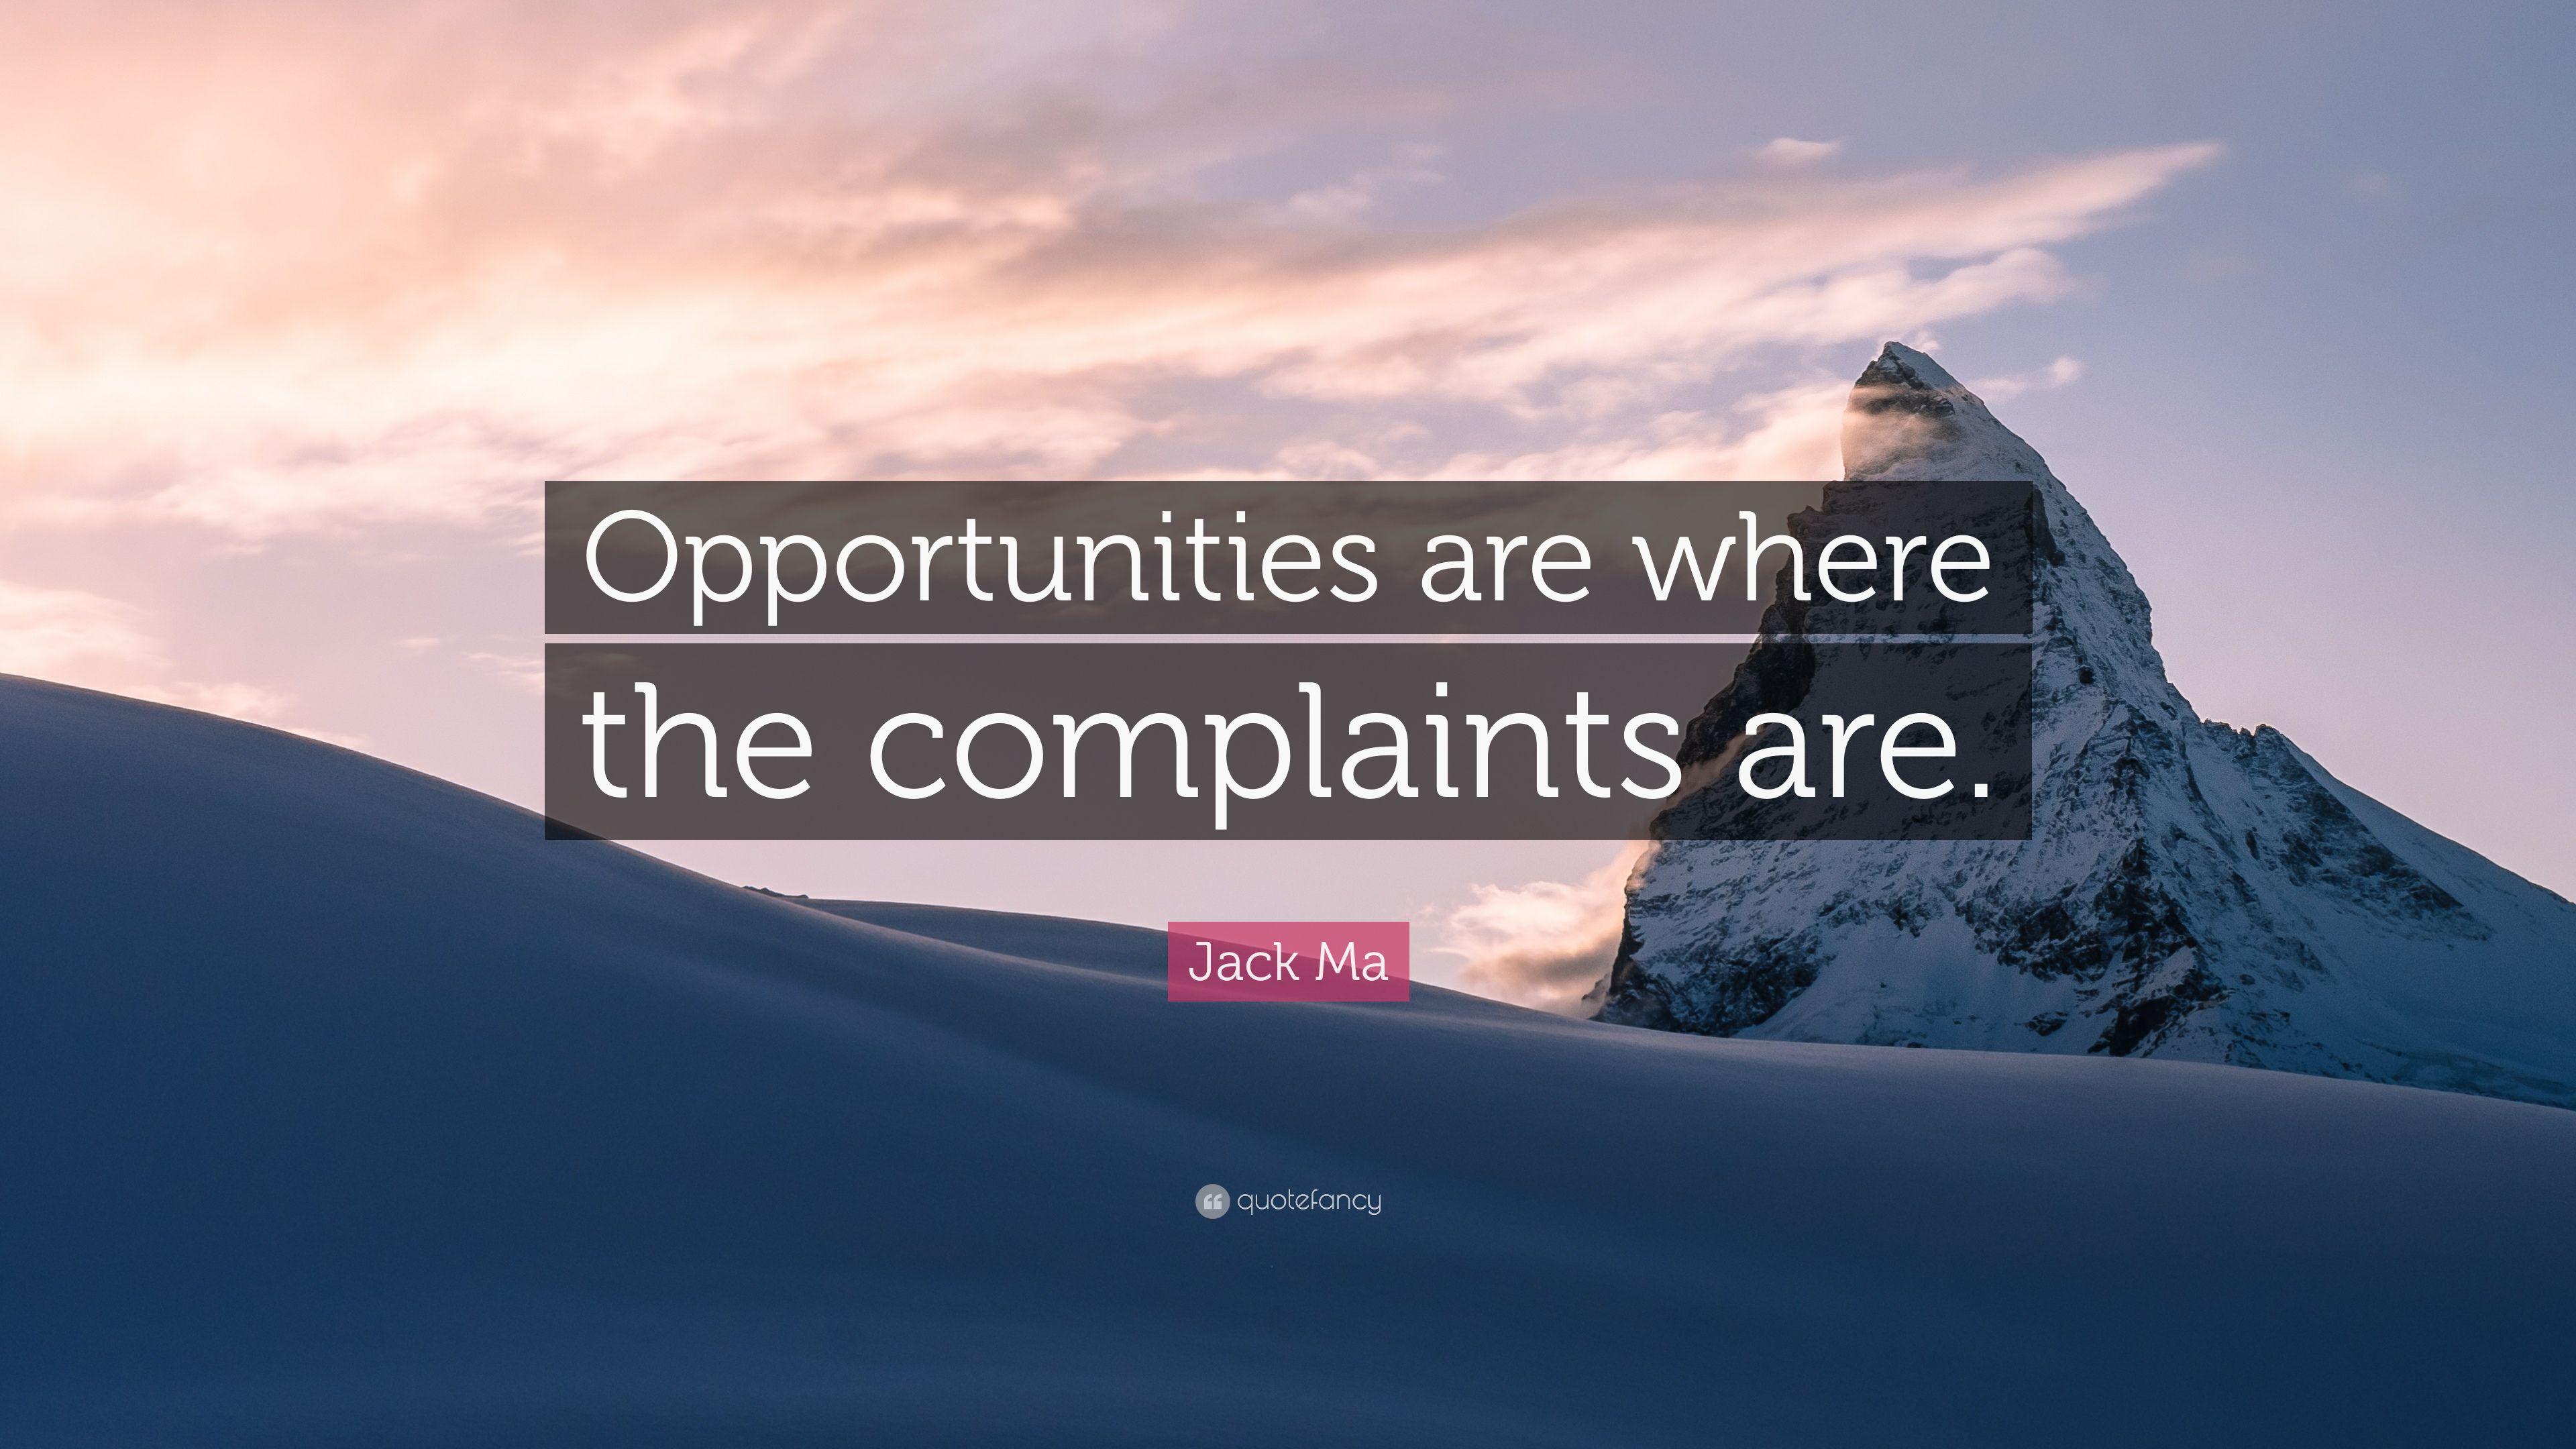 Jack Ma Quote: “Opportunities are where the complaints are.” 12